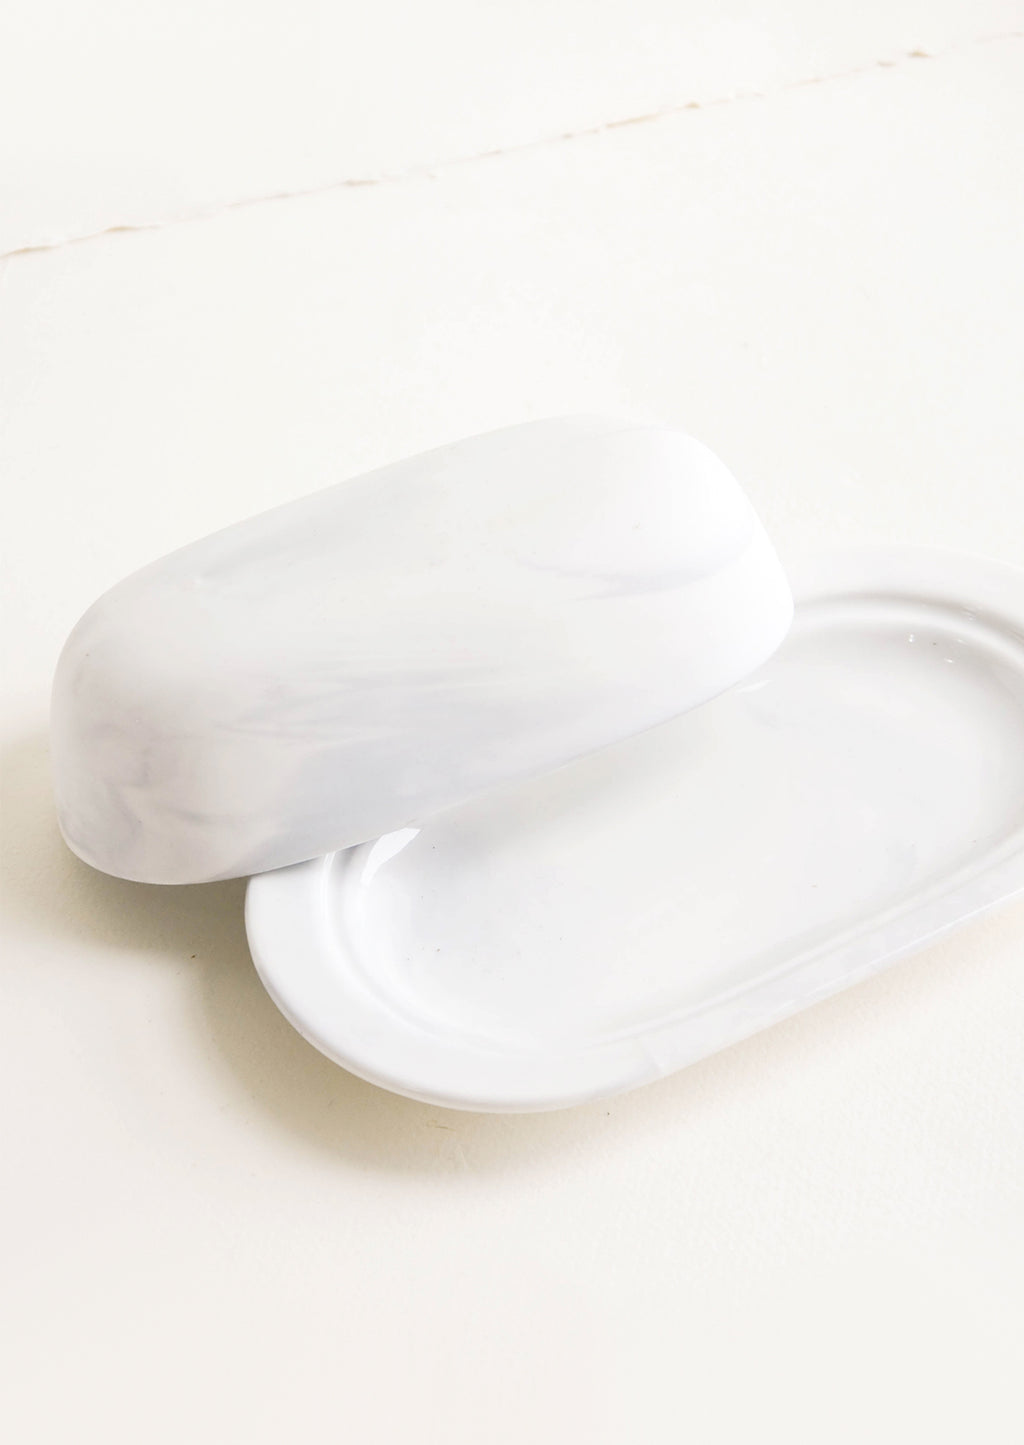 2: Oval shaped butter dish with curved dome lid, matte white ceramic with pale grey marbleized effect 